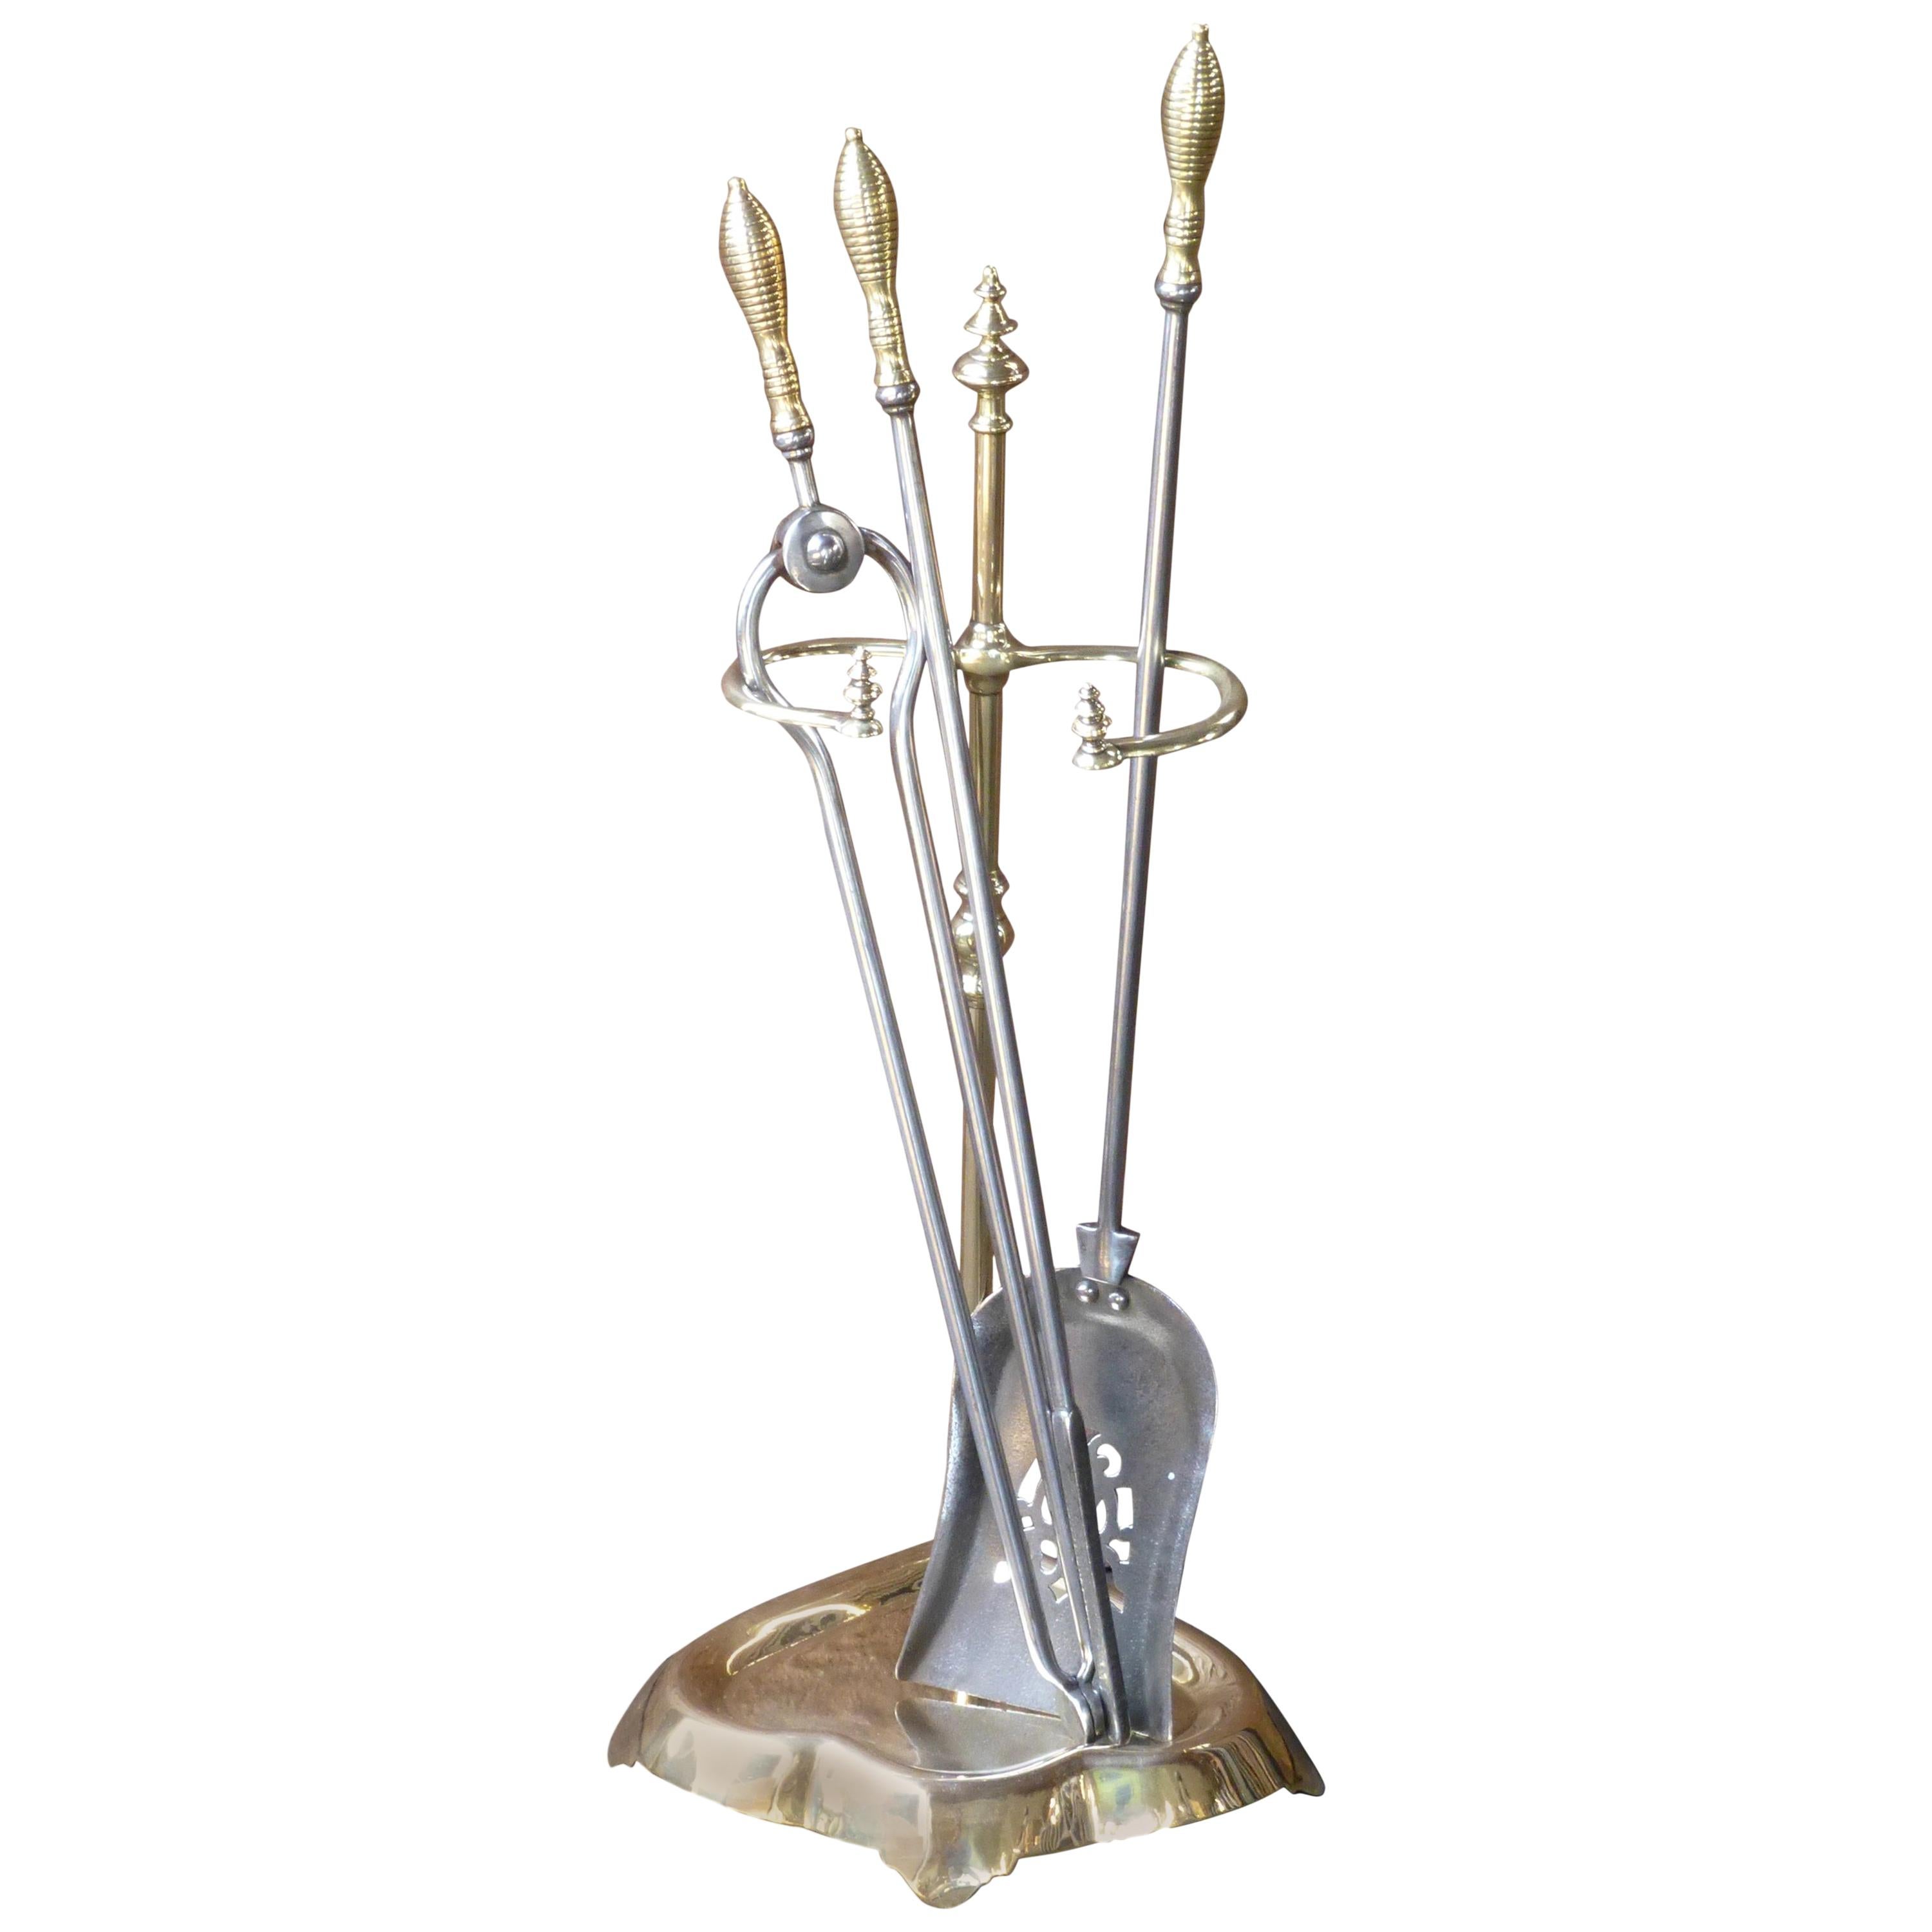 Antique Polished Brass and Steel Fire Tool Set and Stand, 19th Century